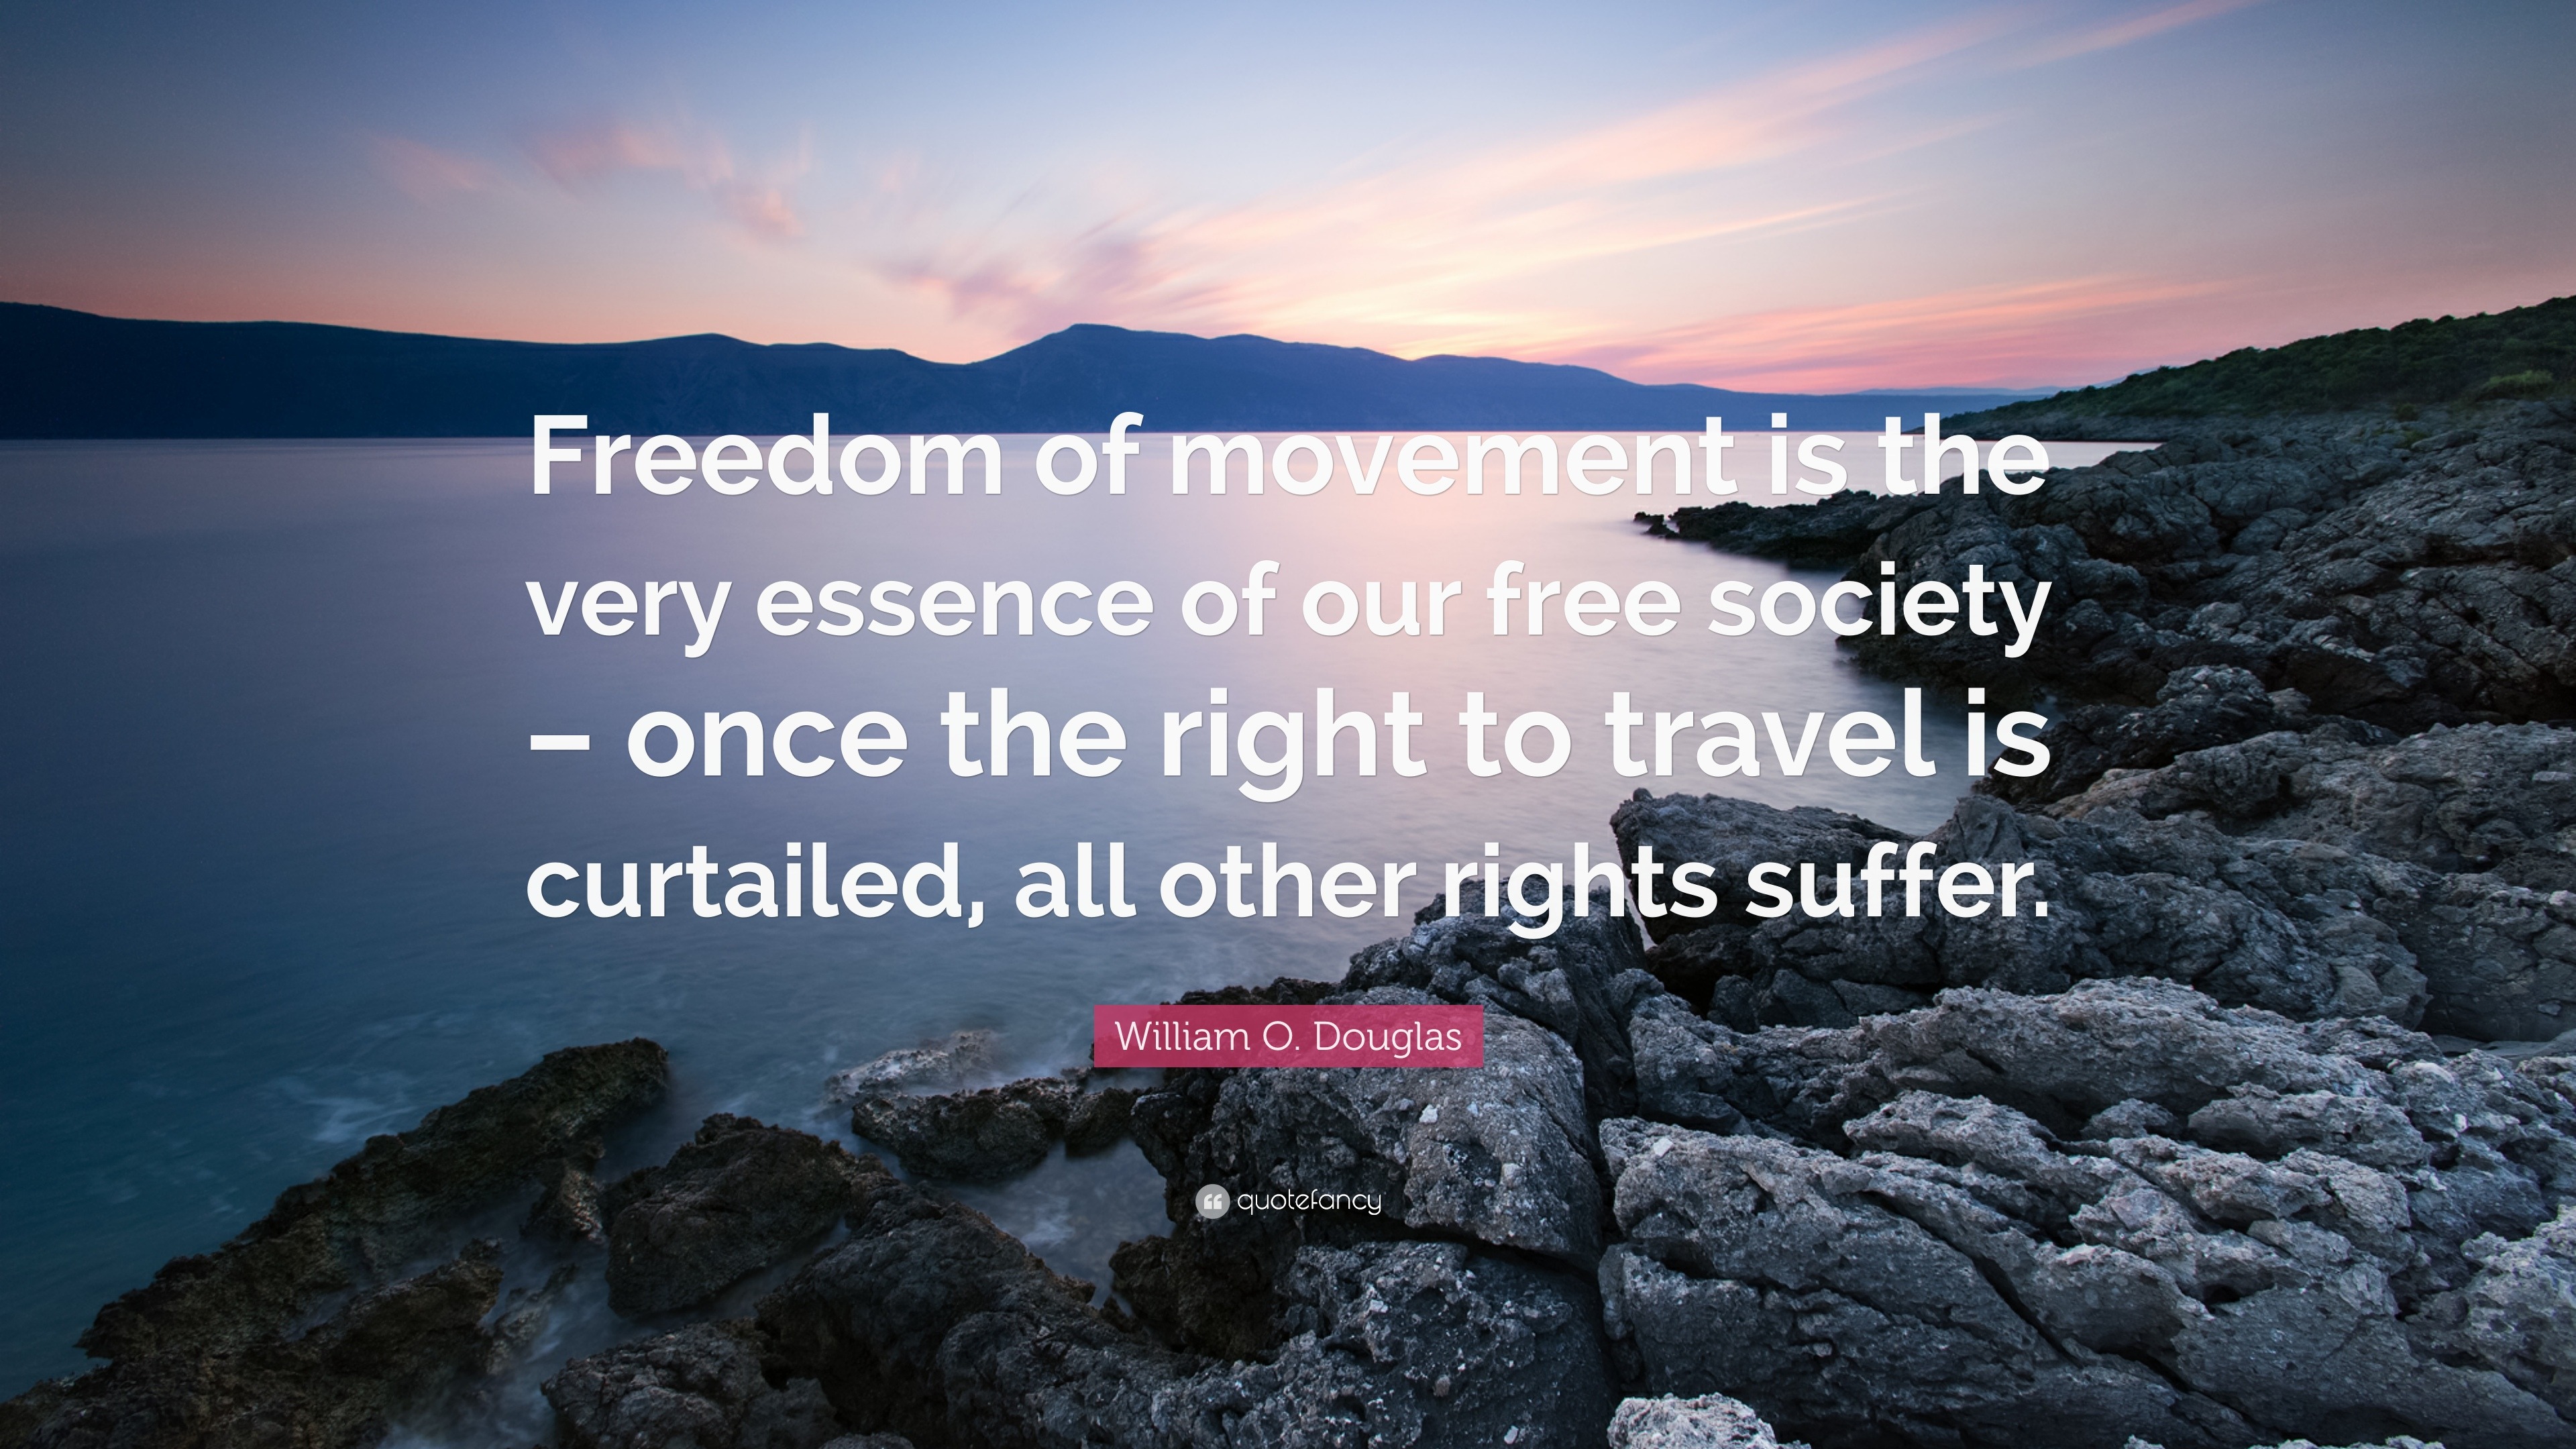 freedom to travel freely